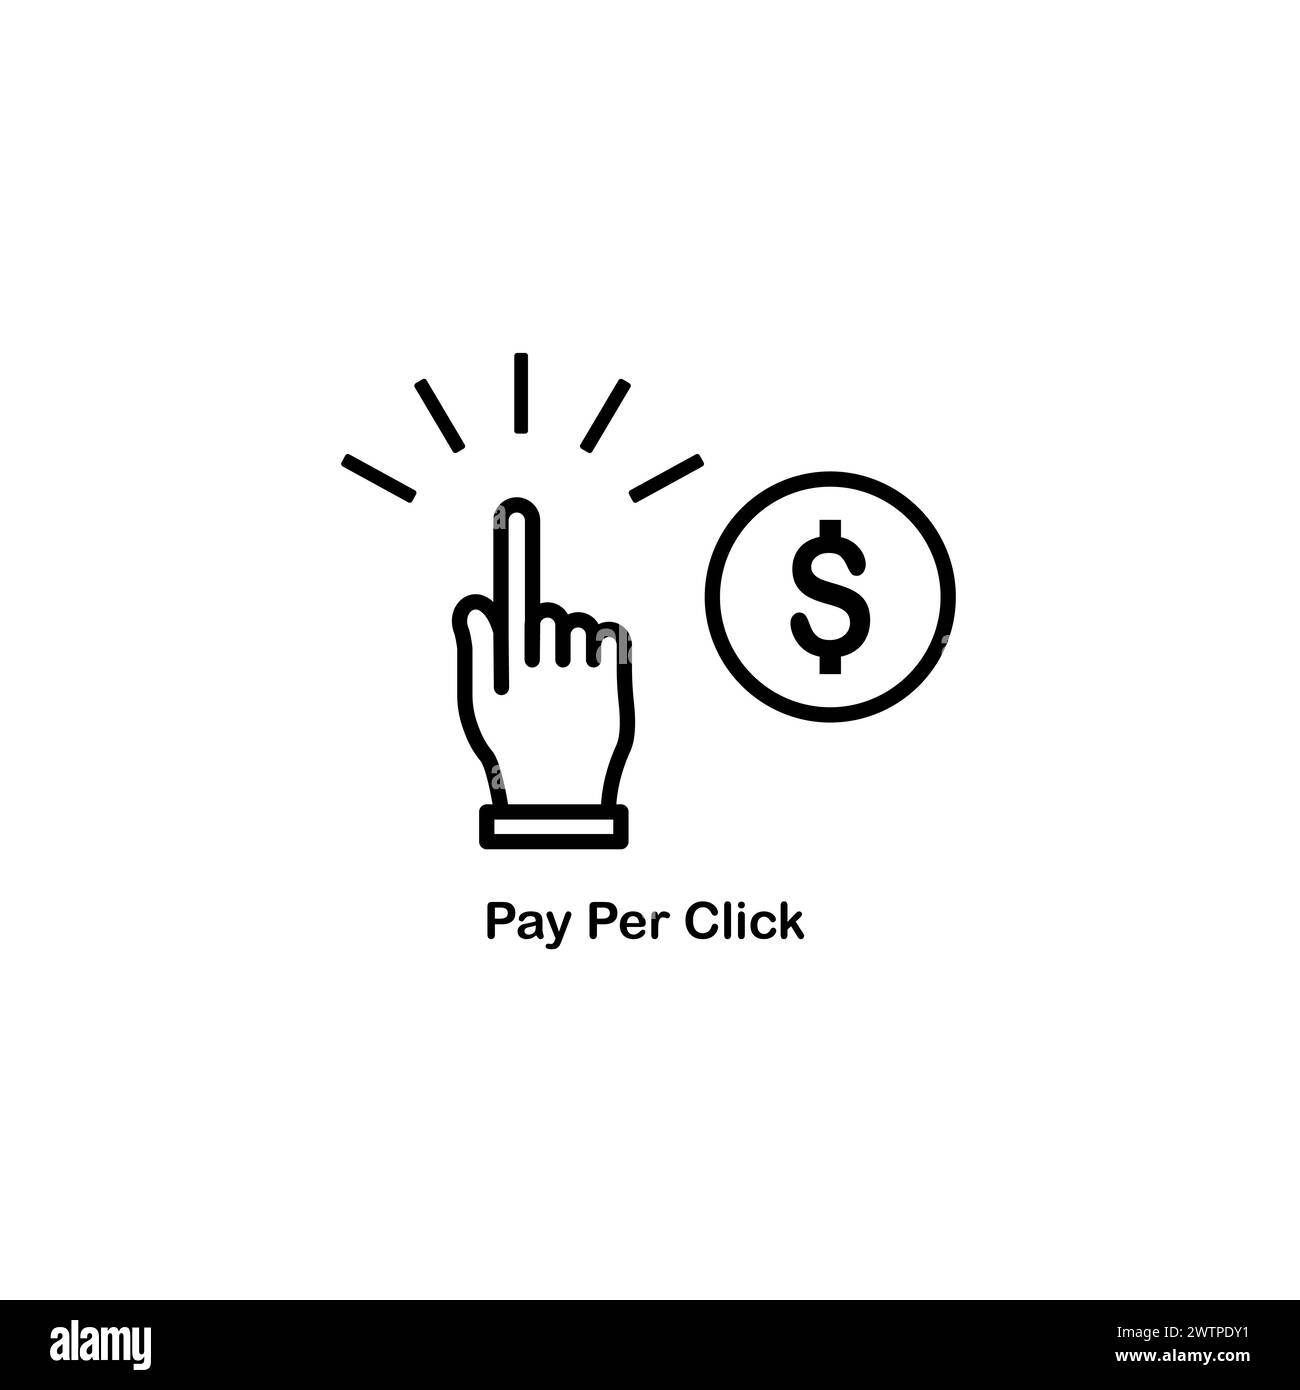 Pay per click icon suitable for info graphics, websites and print media and interfaces. Line vector icon. Stock Vector